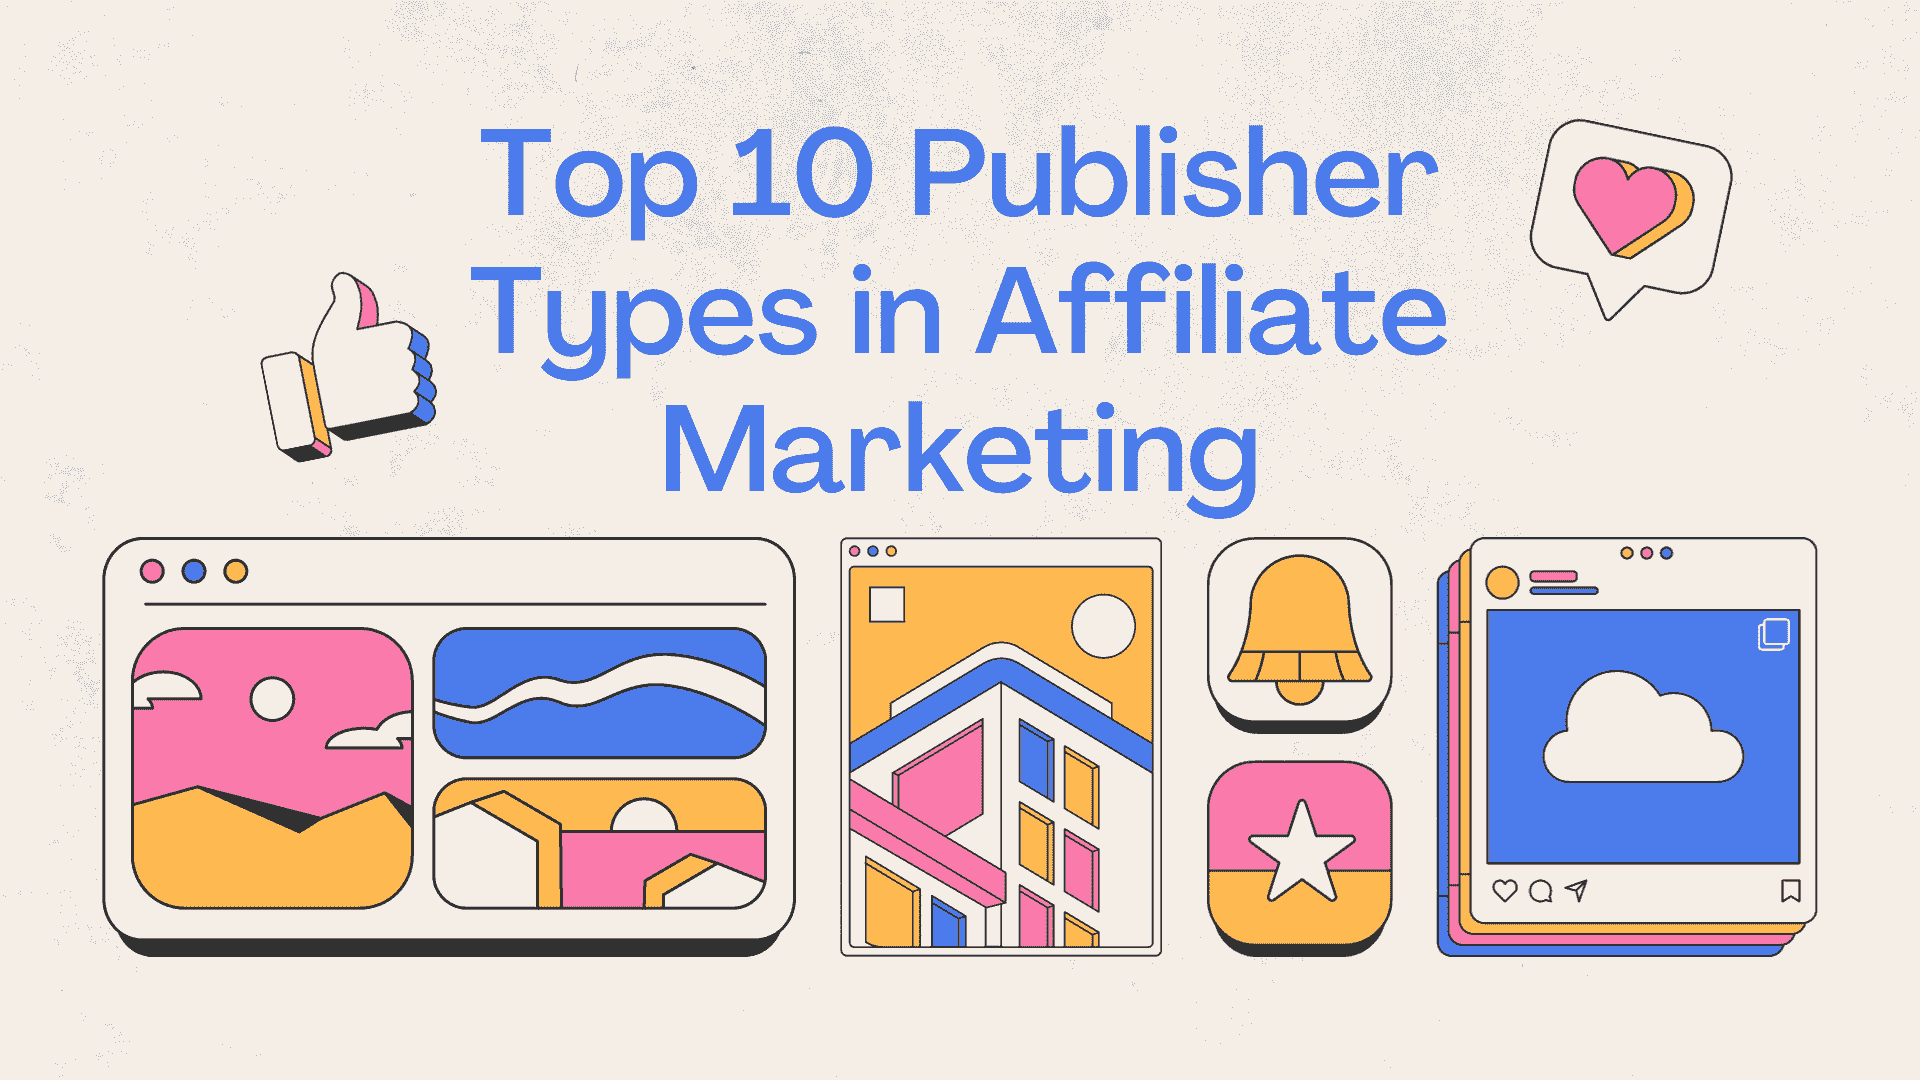 Top 10 Publisher Types in Affiliate Marketing